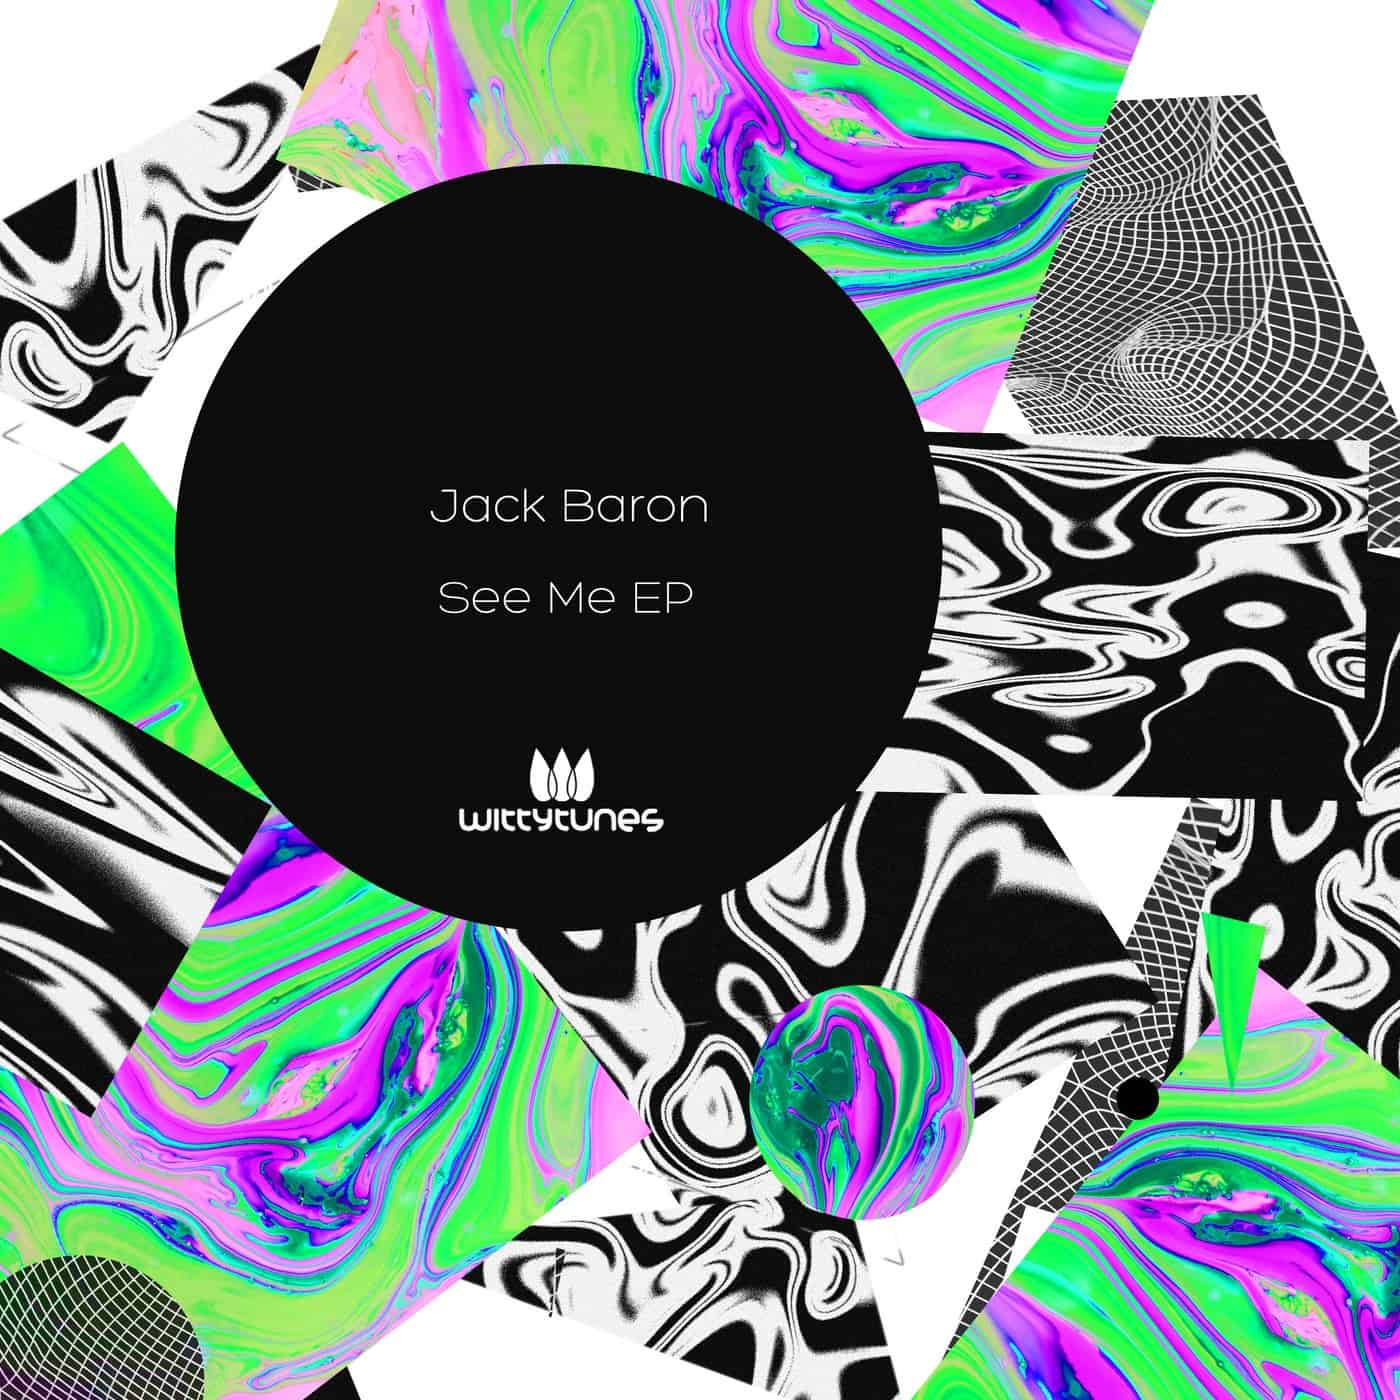 image cover: See Me EP by Jack Baron on Witty Tunes